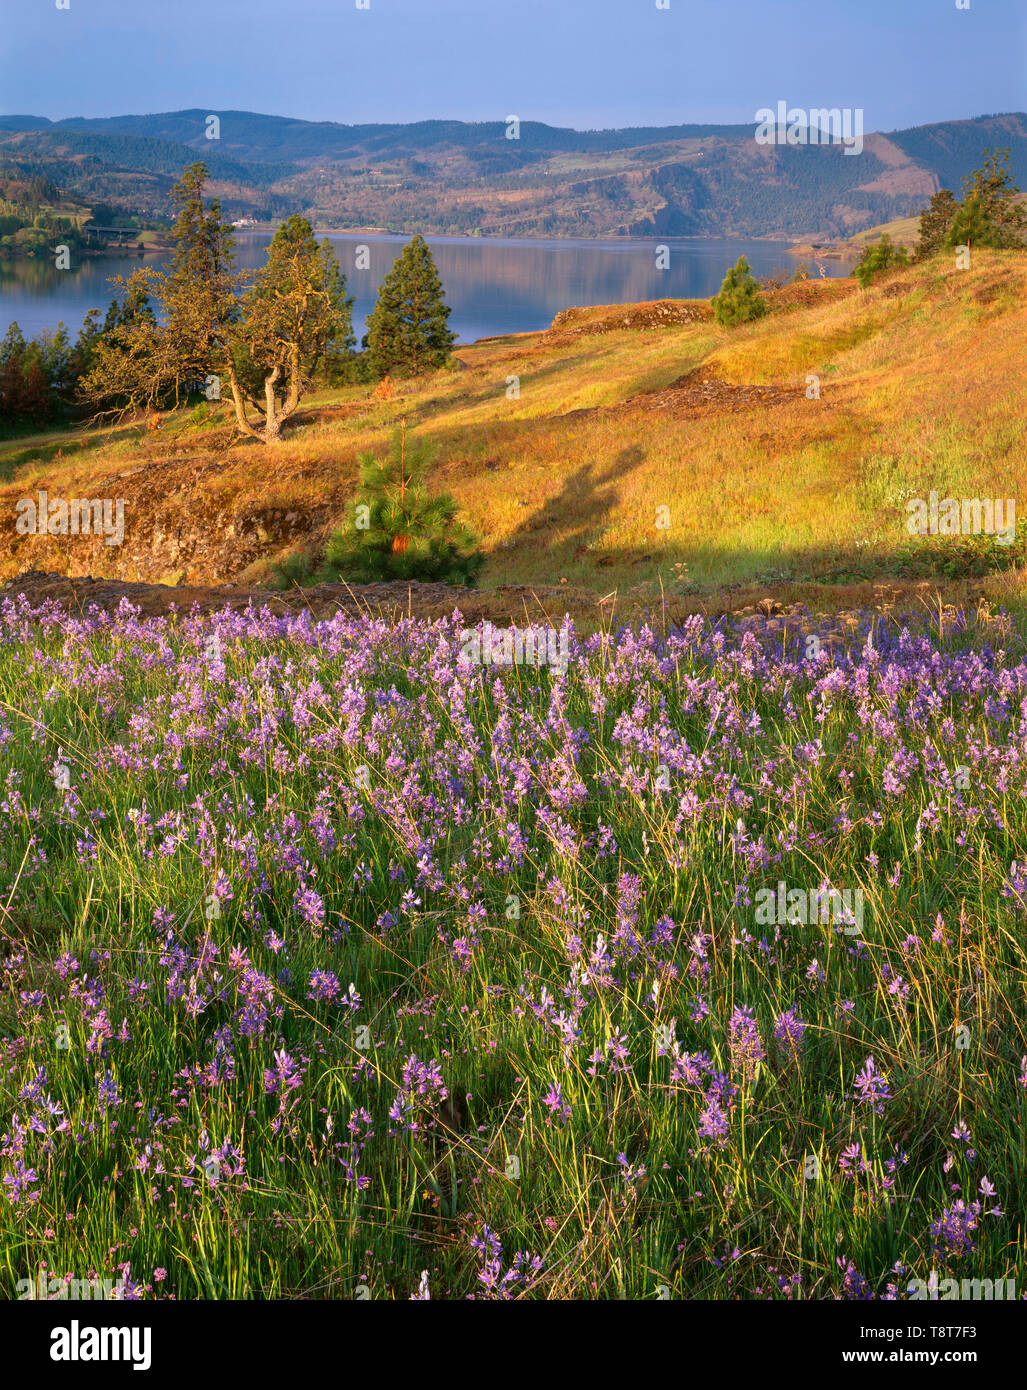 USA, Washington, Columbia River Gorge National Scenic Area, Common camas blooms in Catherine Creek area with the Columbia River in the distance. Stock Photo